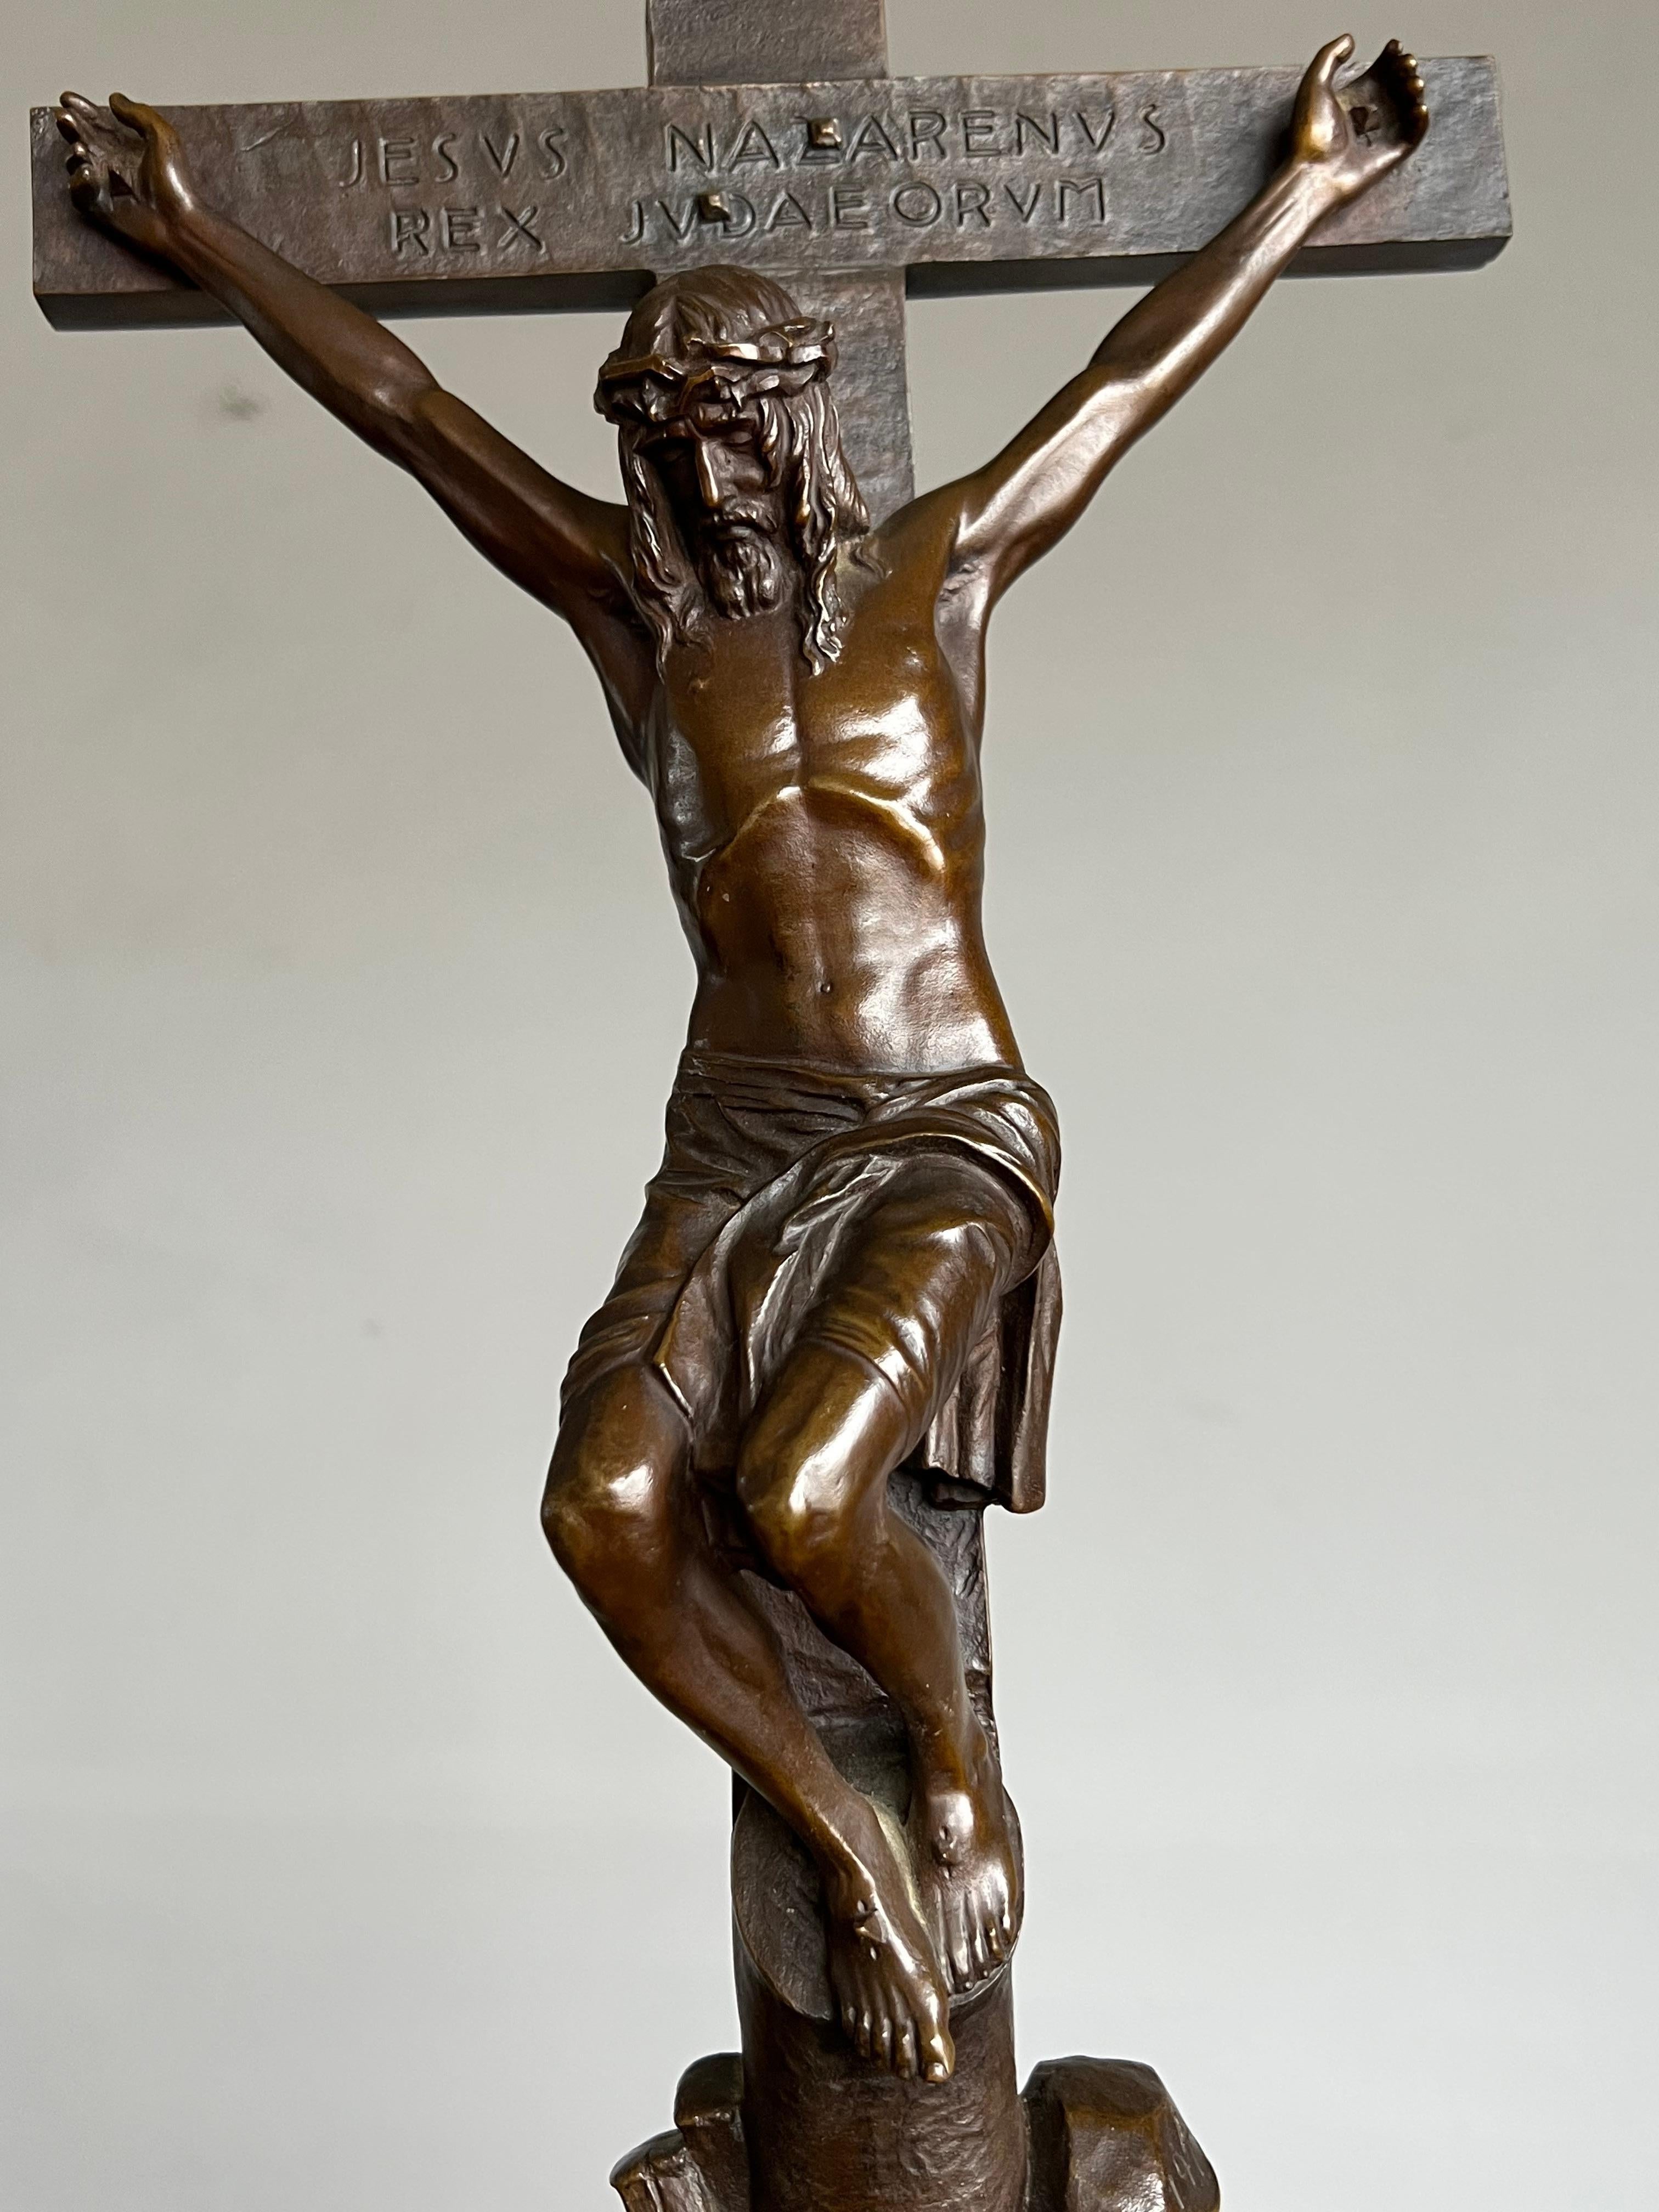 Unique table crucifix and a wonderful work of religious art, dated 1912 and numbered.

For us the most powerful statement will always be 'the truth will set you free'. It is what we have learned most from the life of Christ and of His teachings